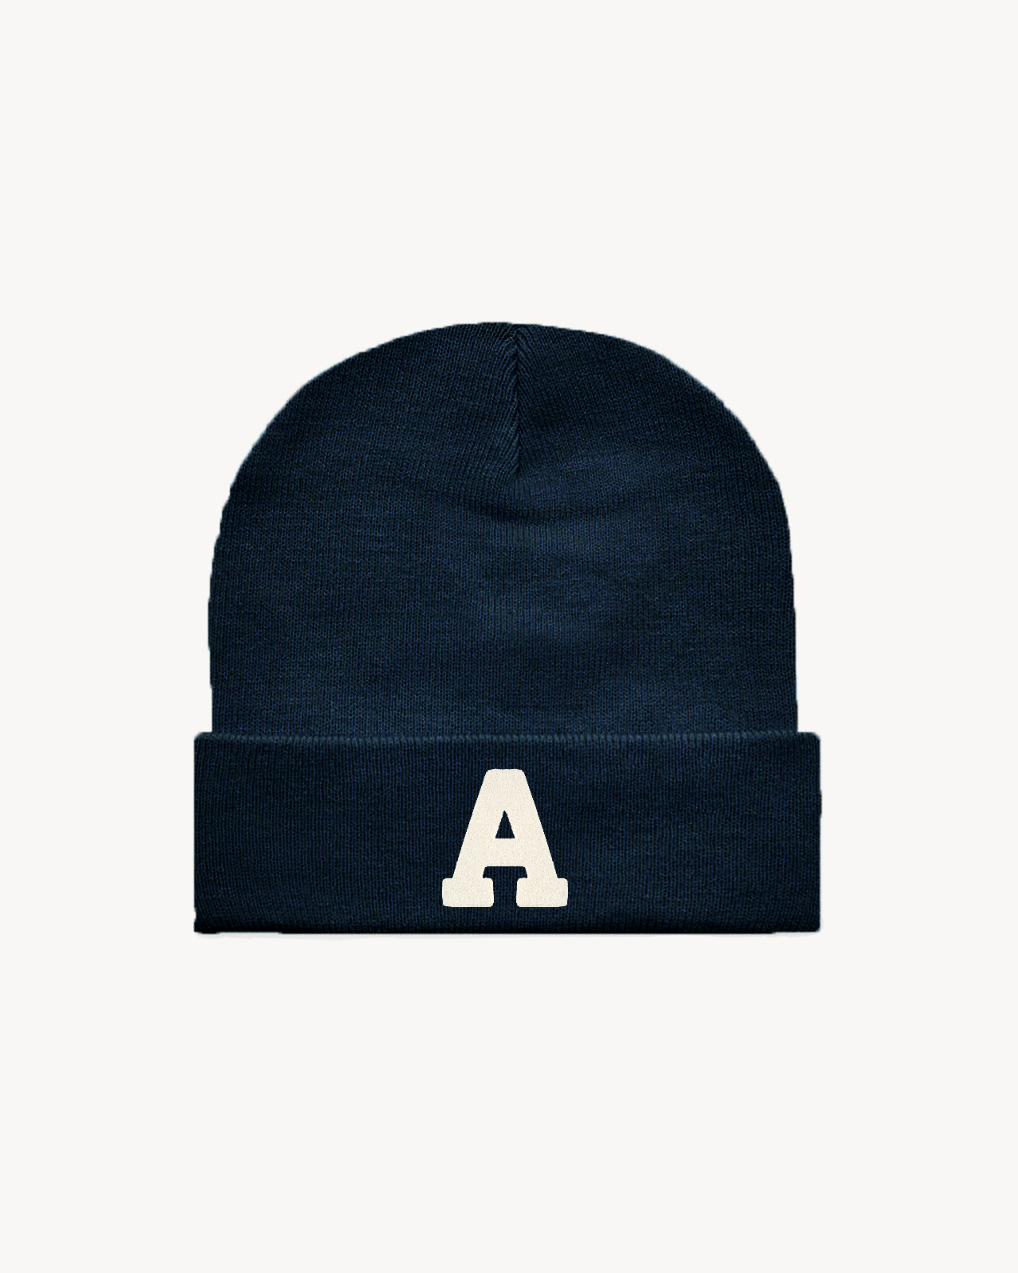 NAVY BLUE HAT | MINI CURLY INITIAL